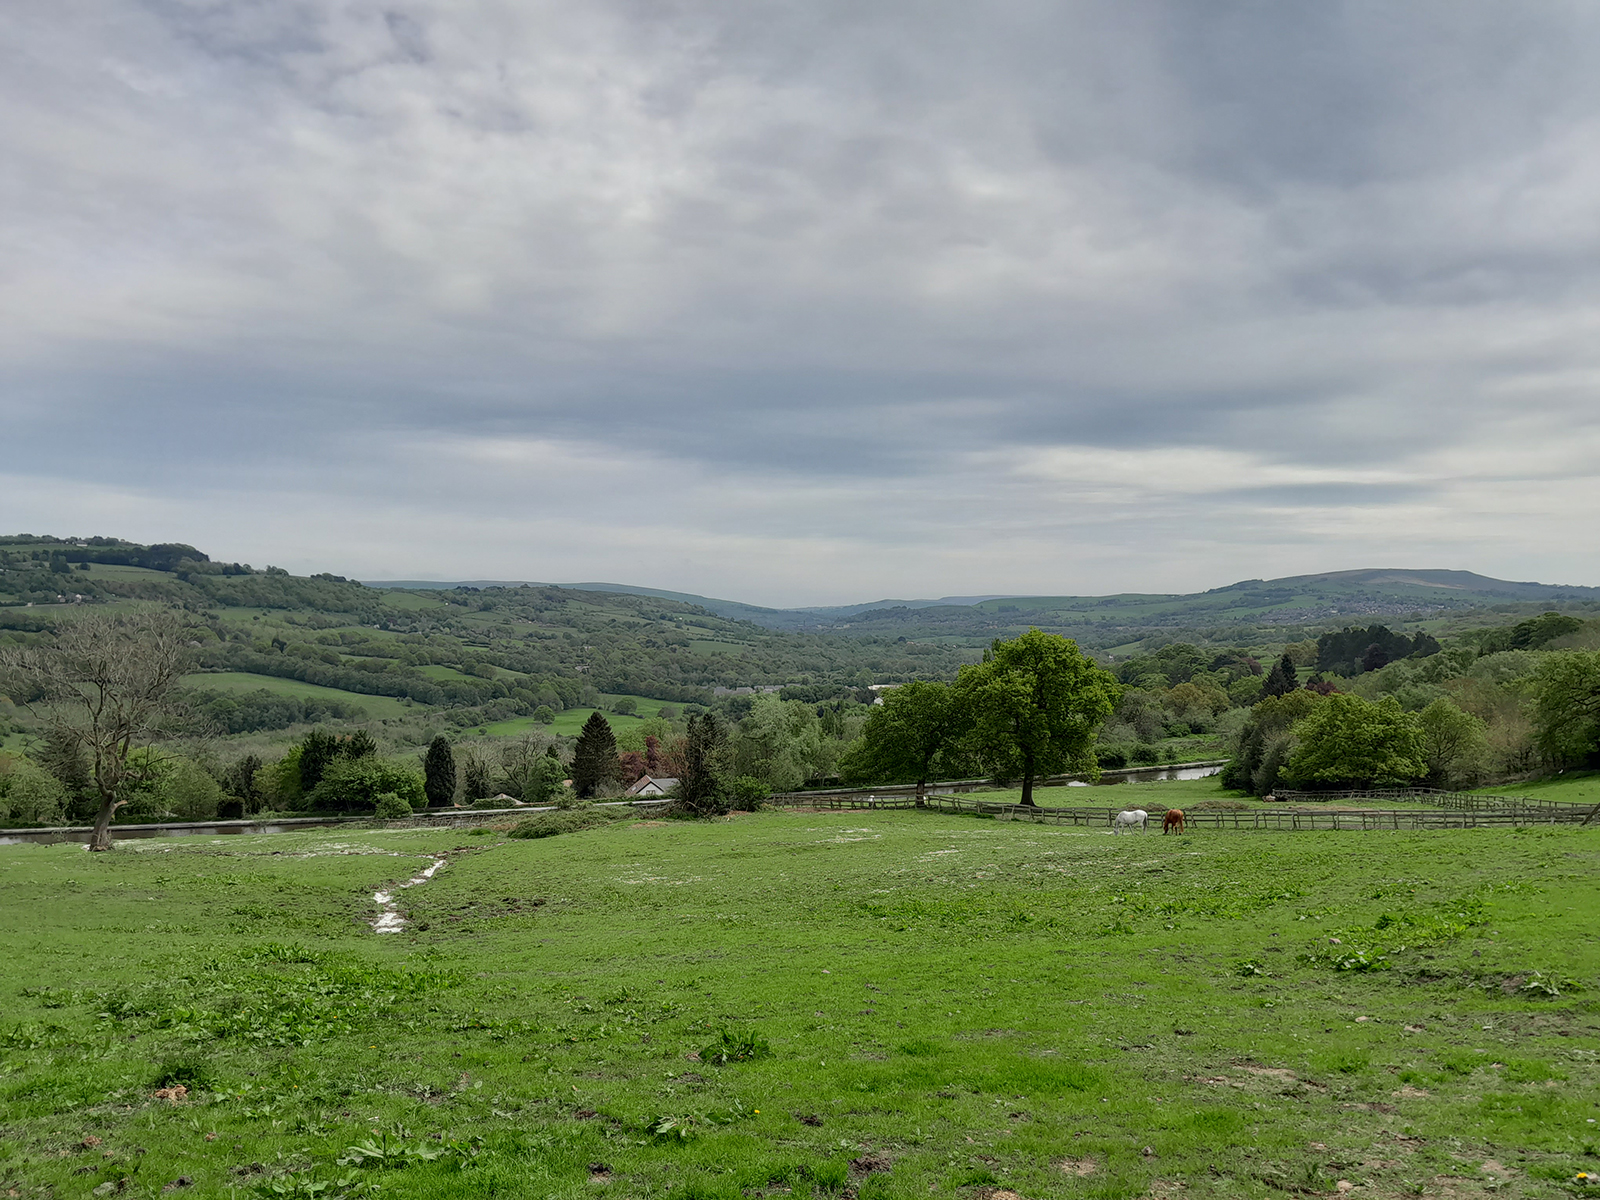 Samsung Galaxy A13 camera sample showing a field and hills (normal mode) in the day